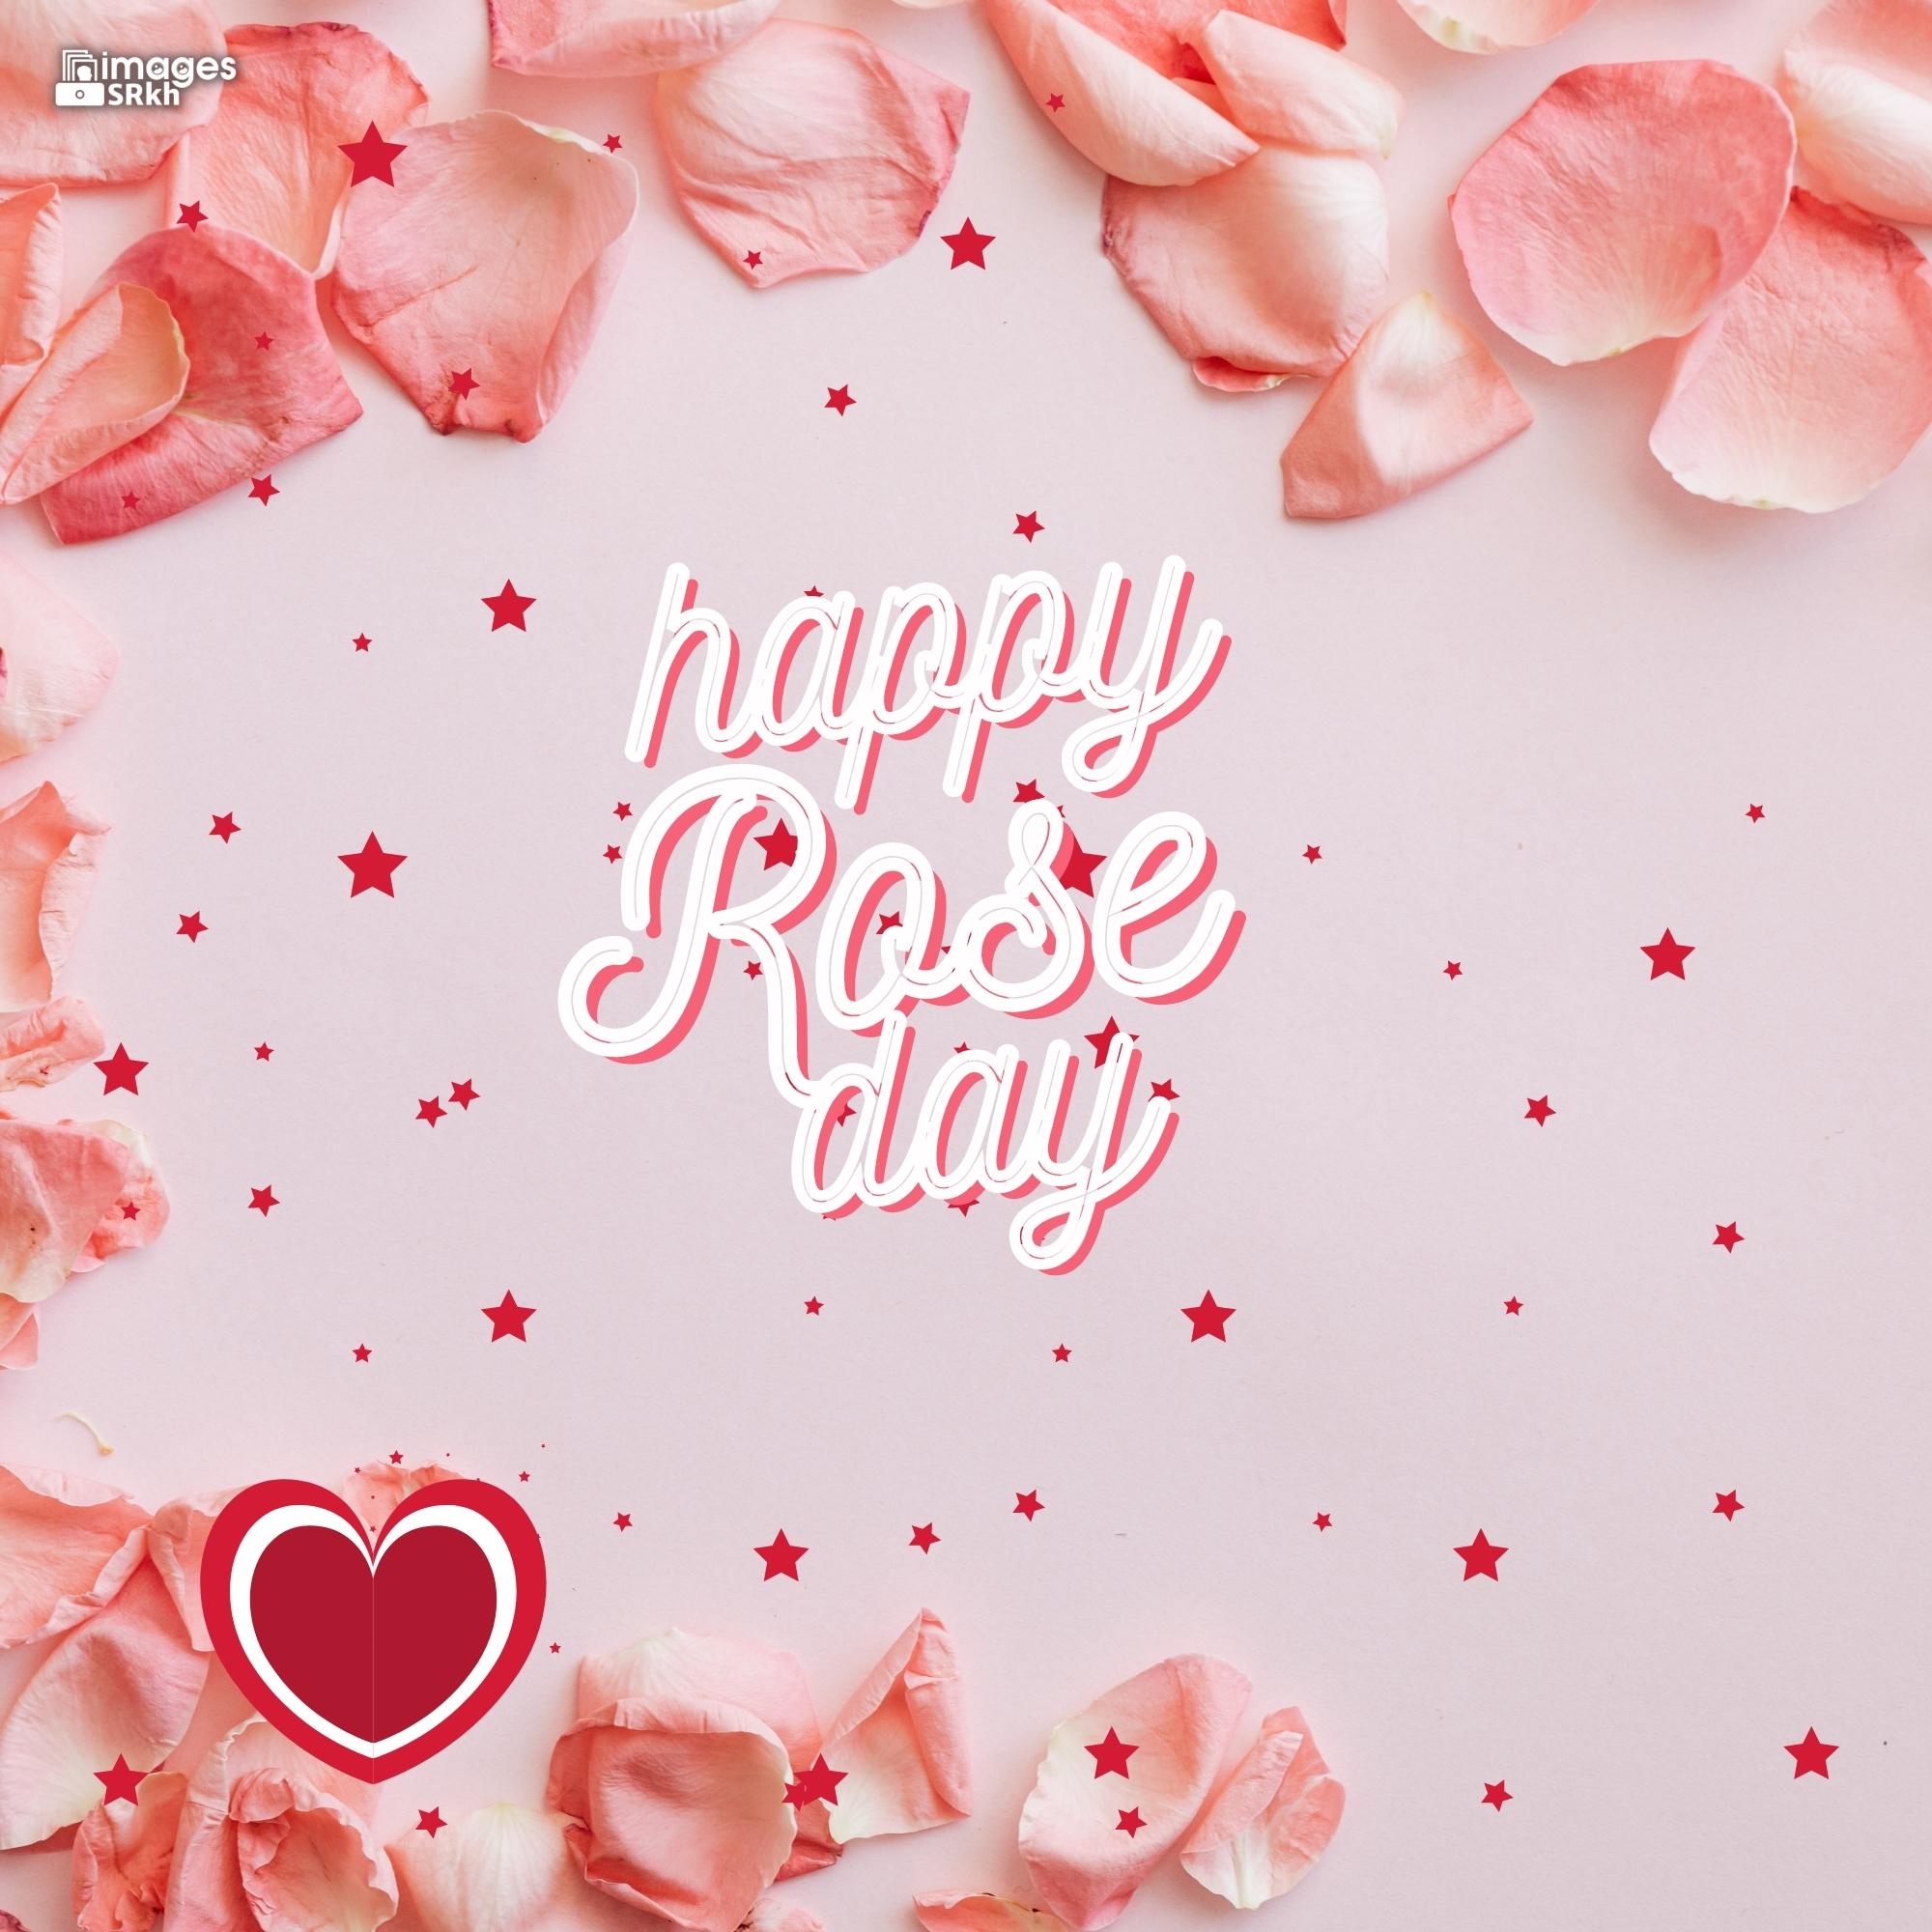 Happy Rose Day Image Hd Download (87)